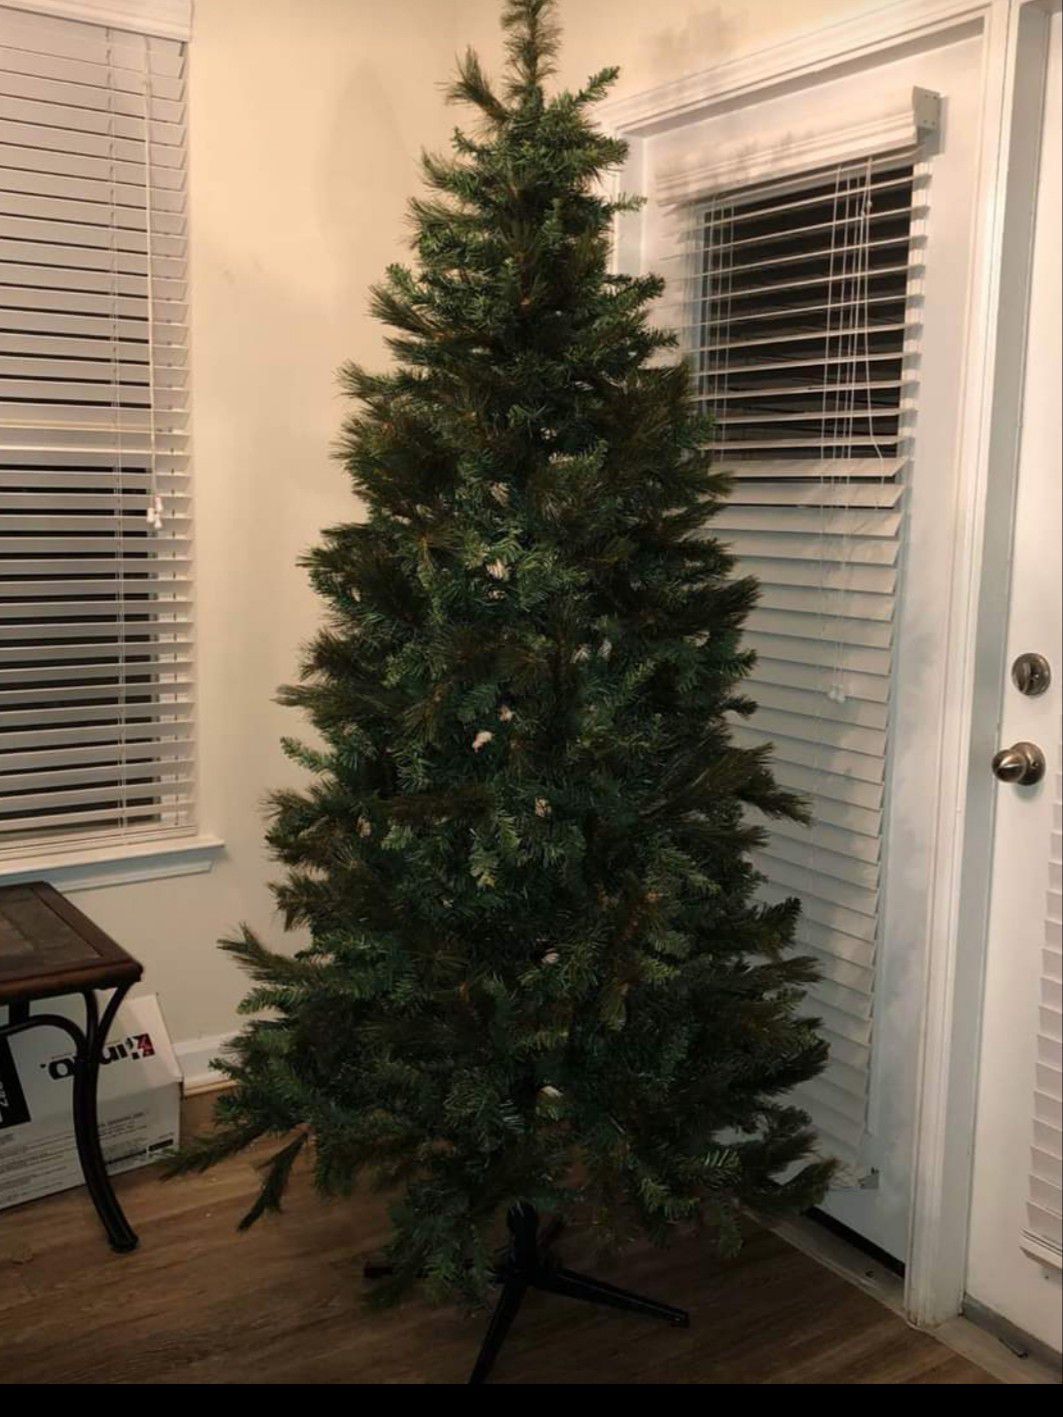 7 ft Unlit Scottsdale Pine Christmas Tree. Very good condition. Comes with box.